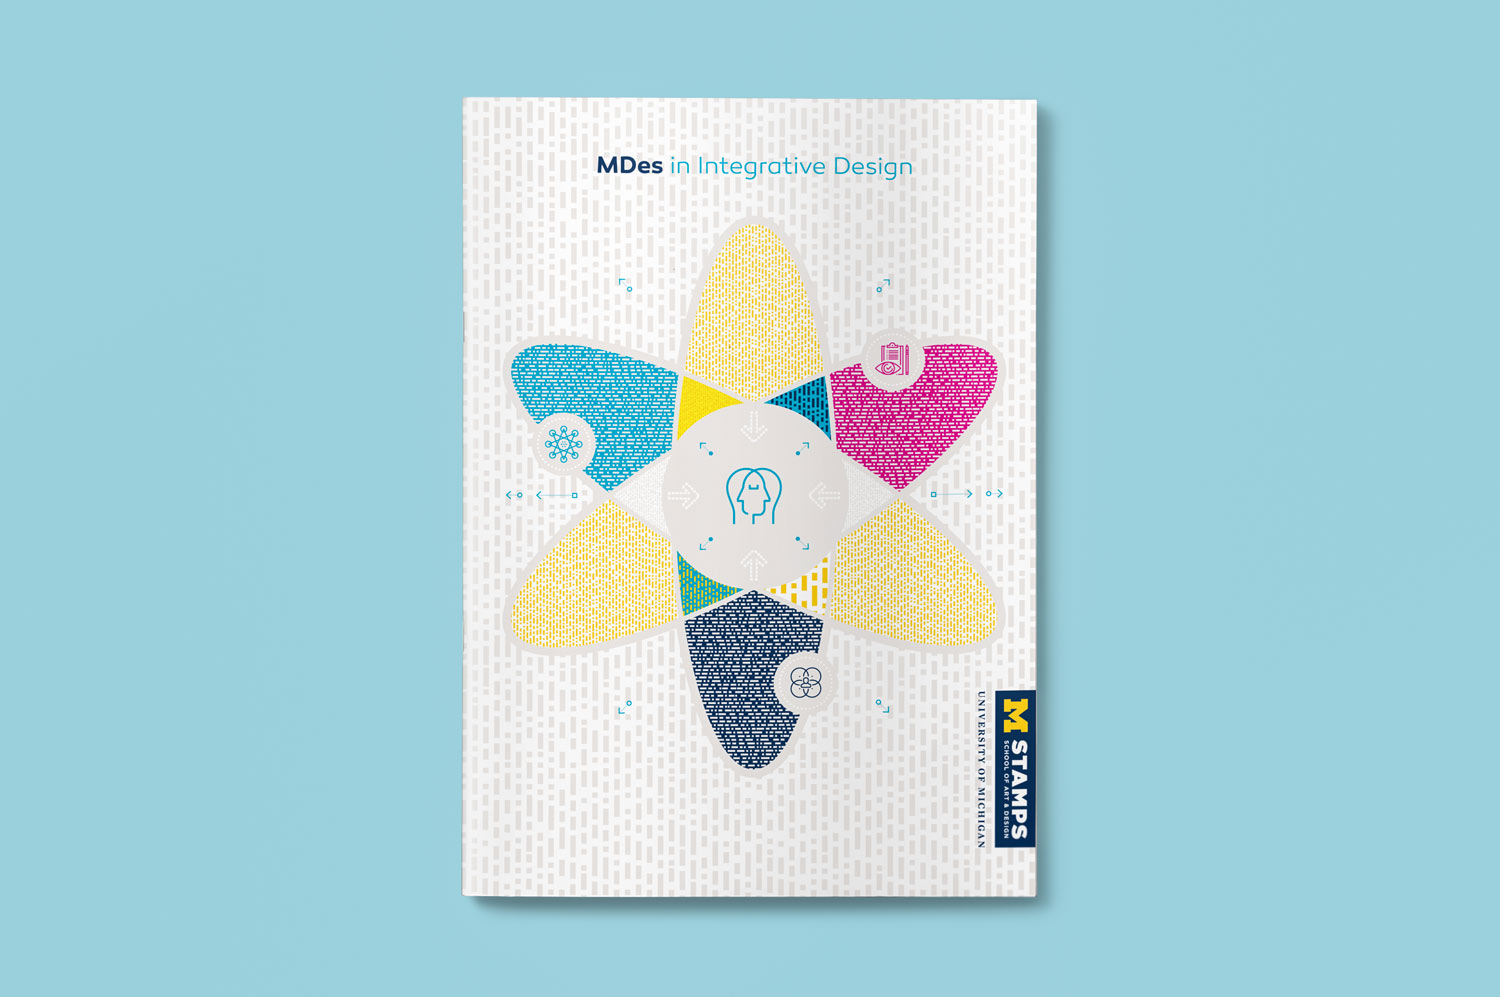 mdes-brochure-cover-top-1